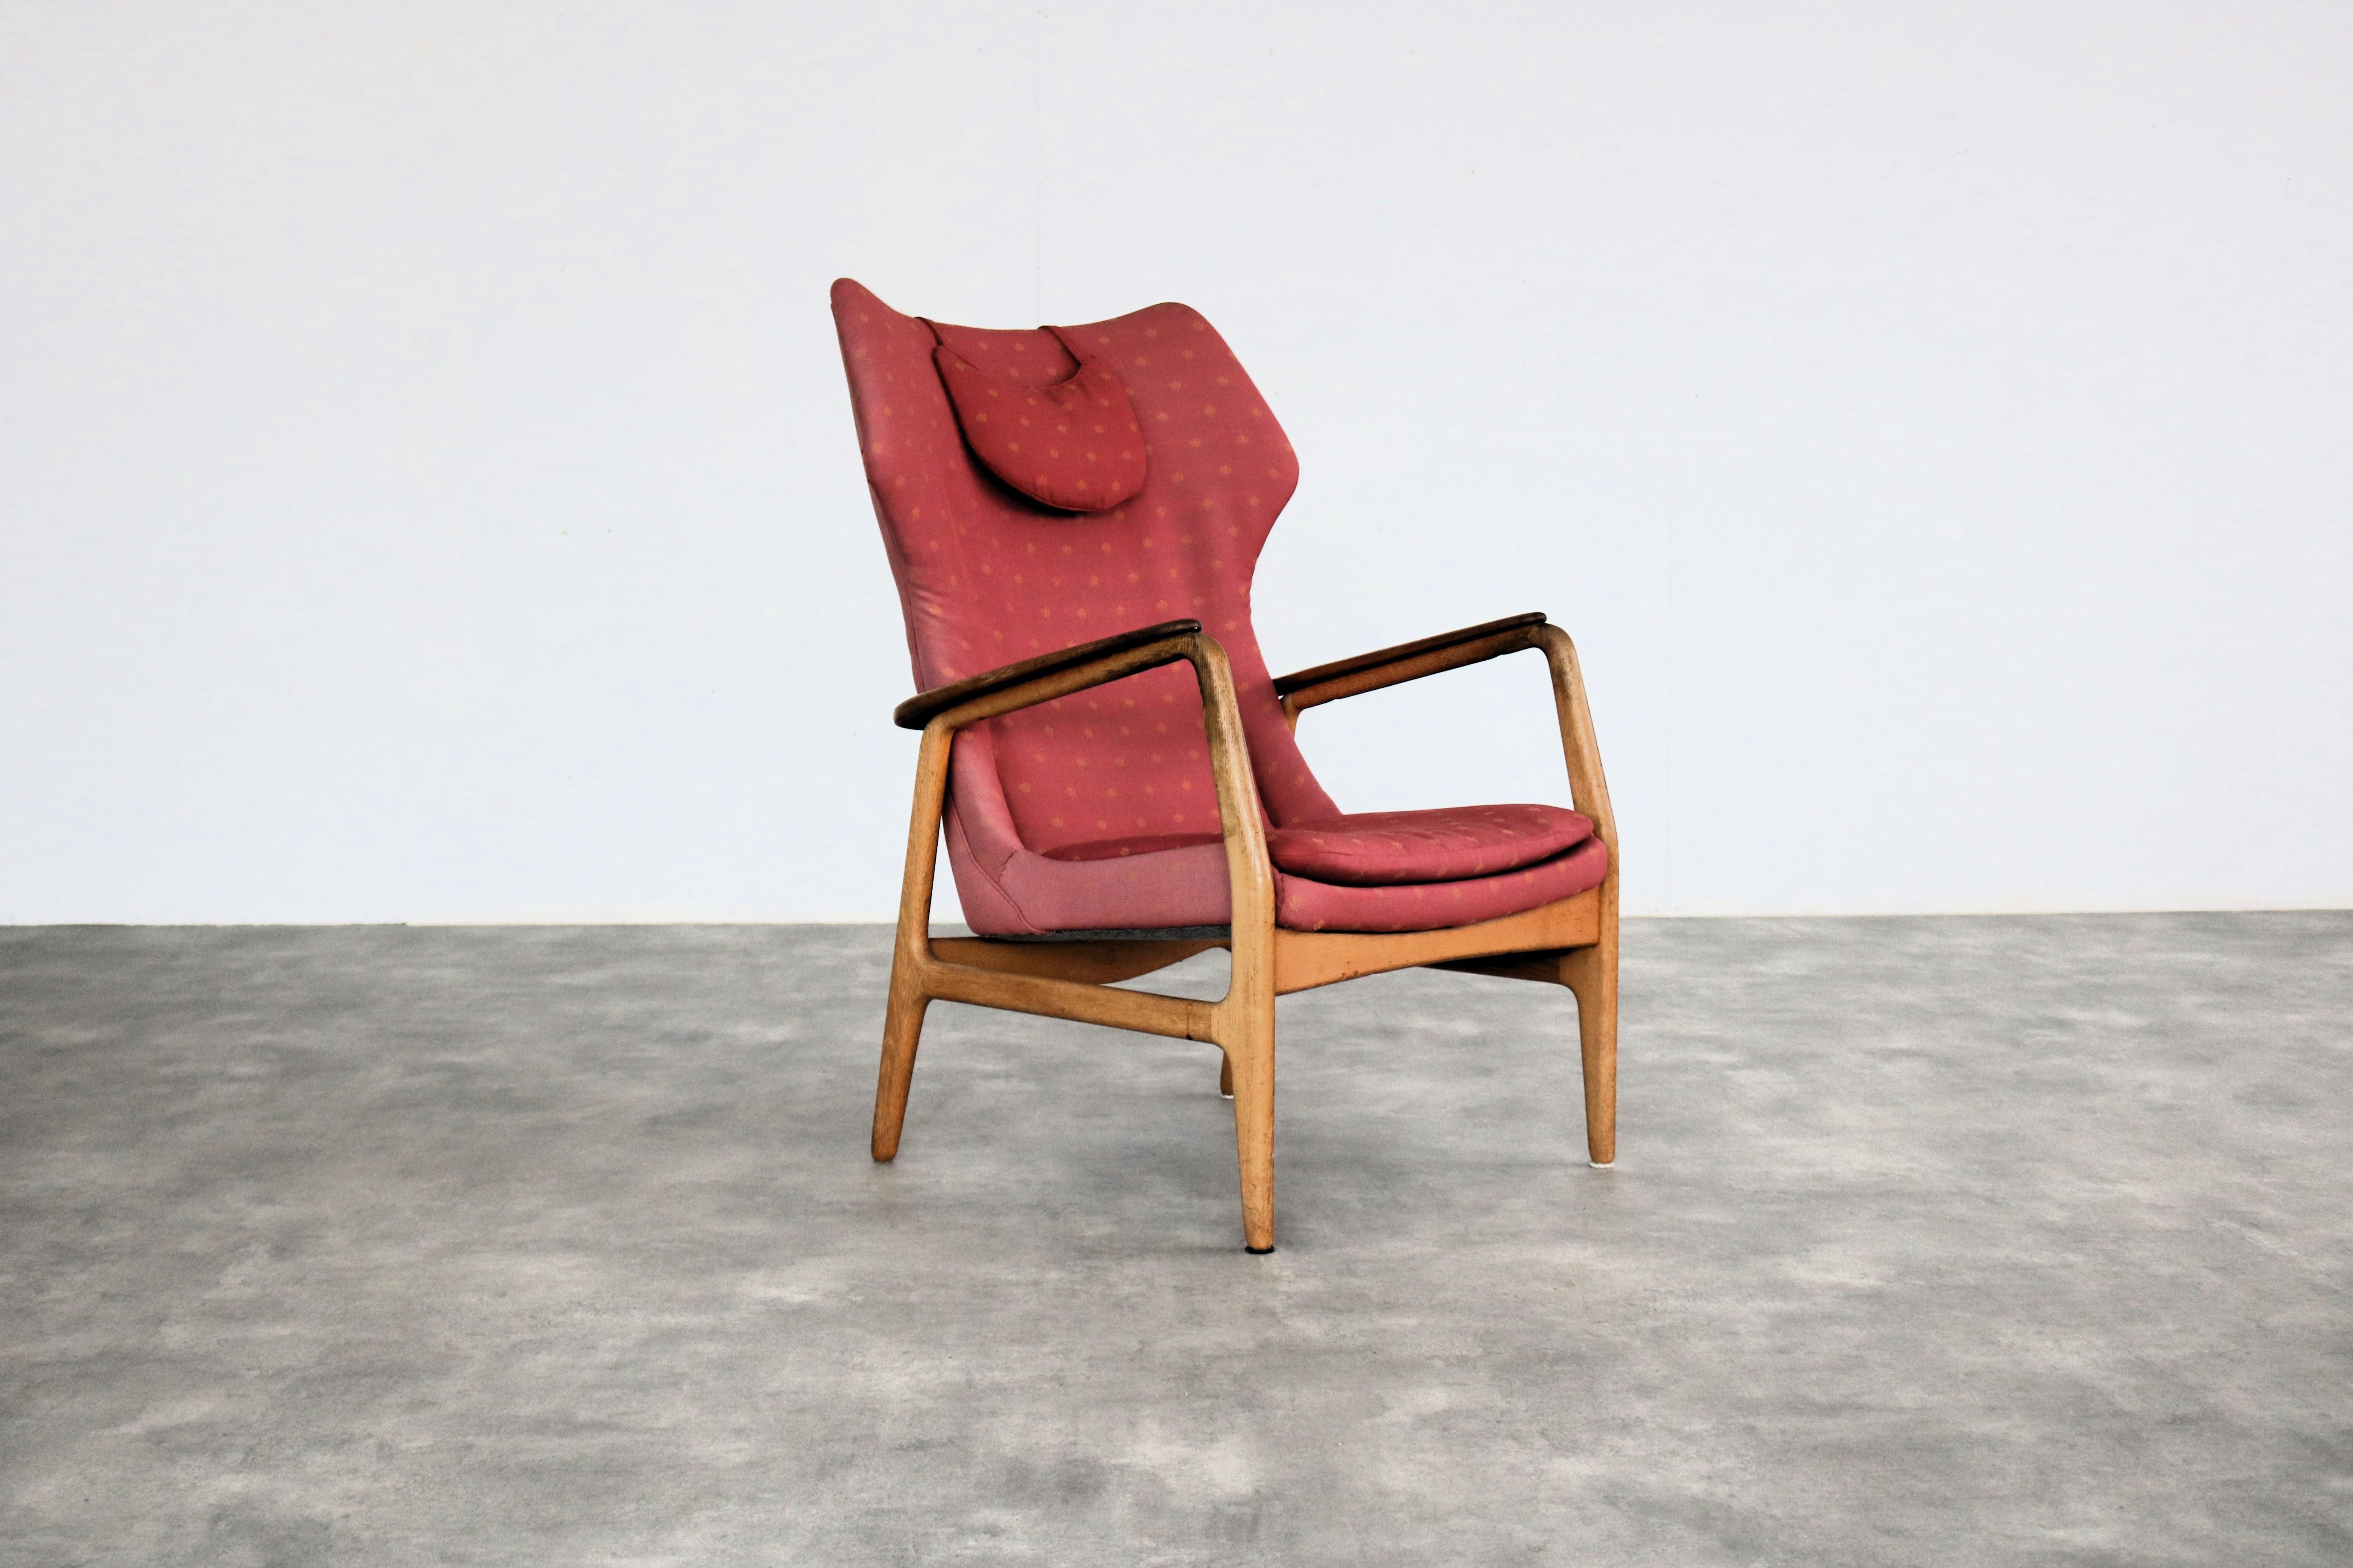 vintage Bovenkamp armchair  armchair  60's

period  60's
design  Arnold Madsen & Henry Schubell  Bovenkamp  The Netherlands
condition  good  light signs of use
size  85 x 65 x 80 (hxwxd) seat height 42 cm;

details  oak; teak; textile;

article